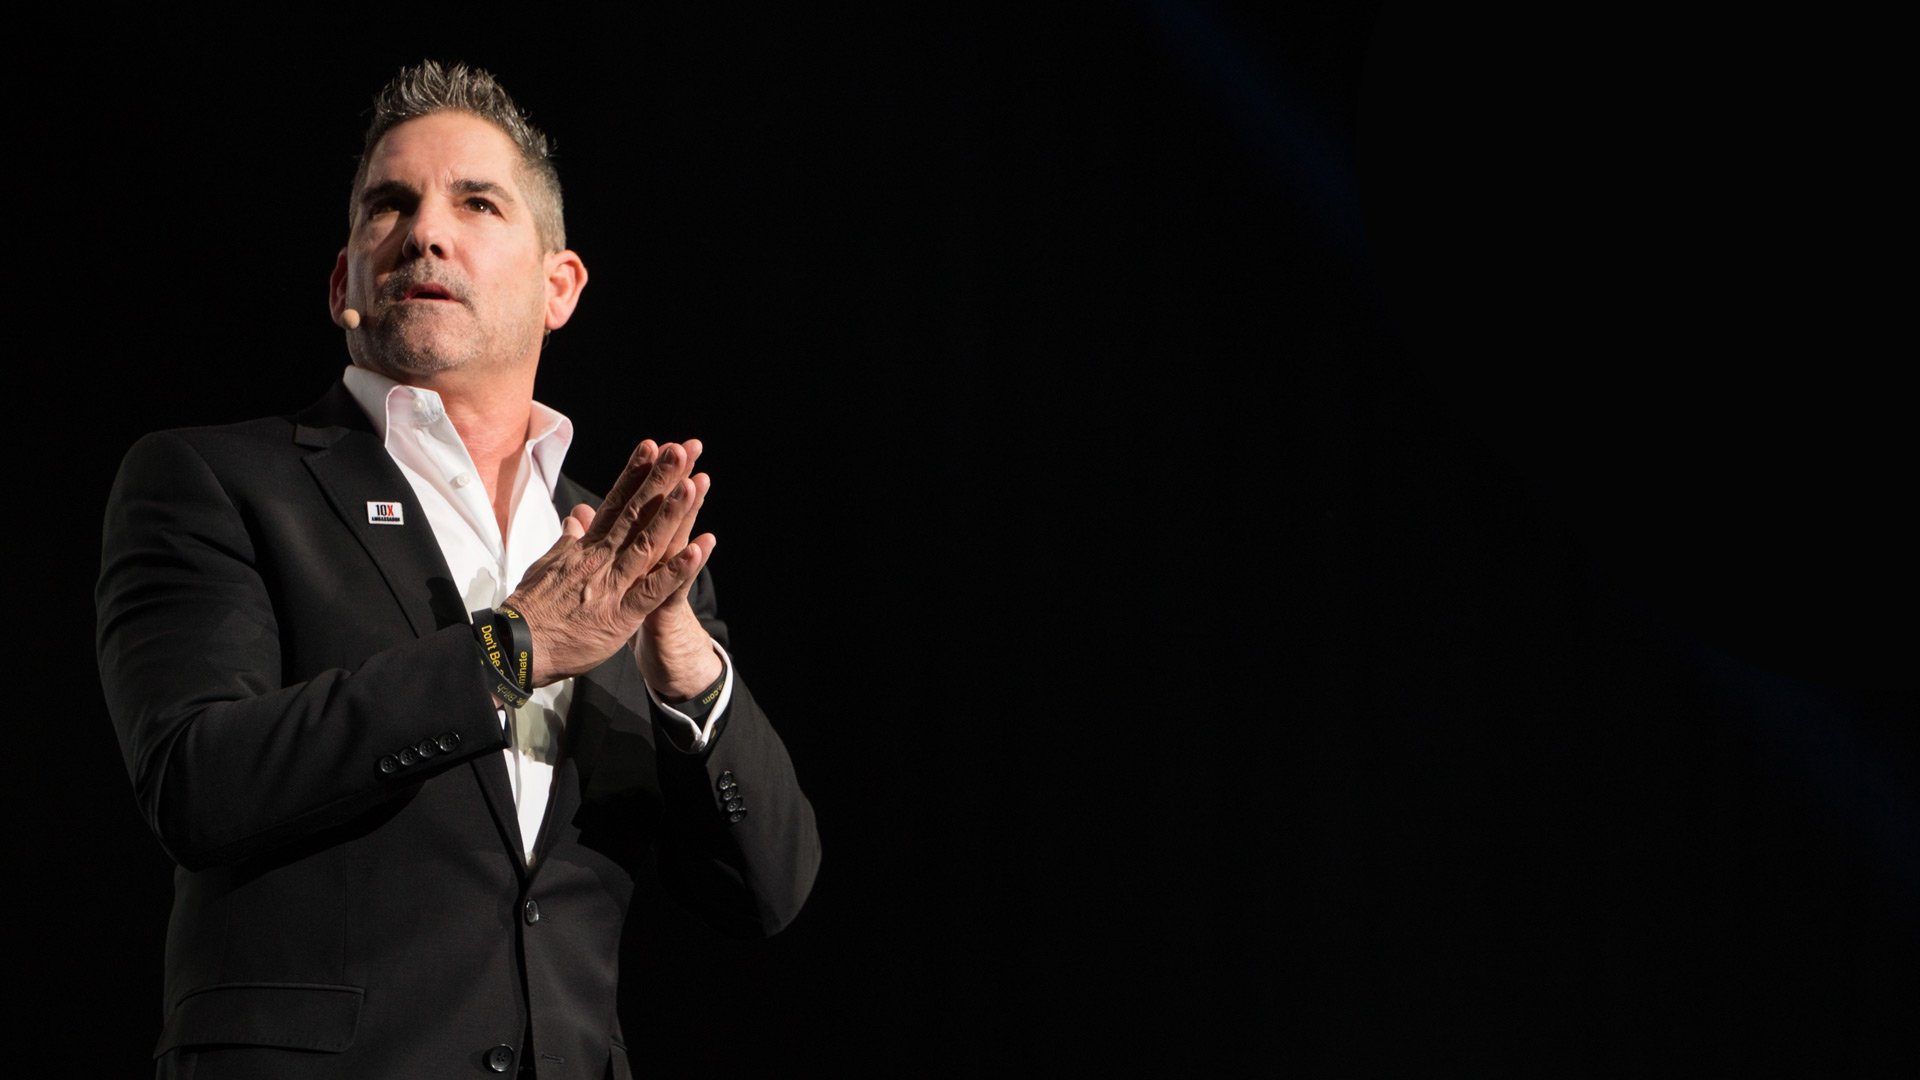 Grant Cardone: Notes on Sales - Cardone Solutions